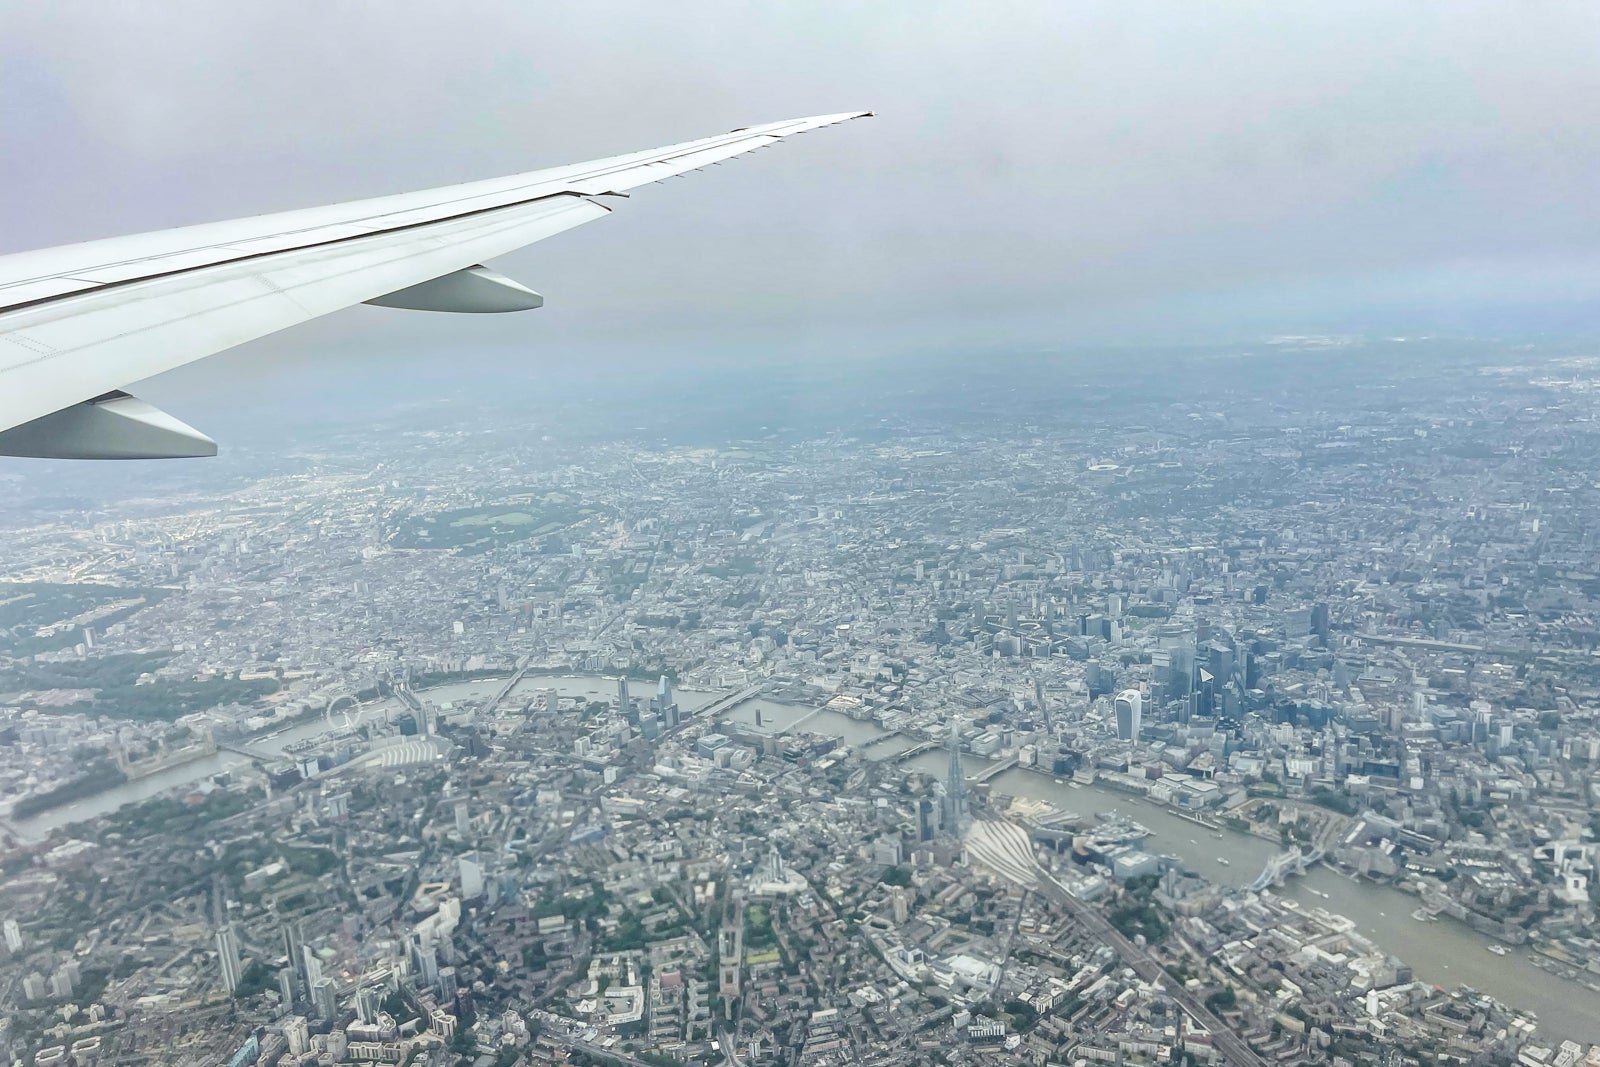 Approach into London